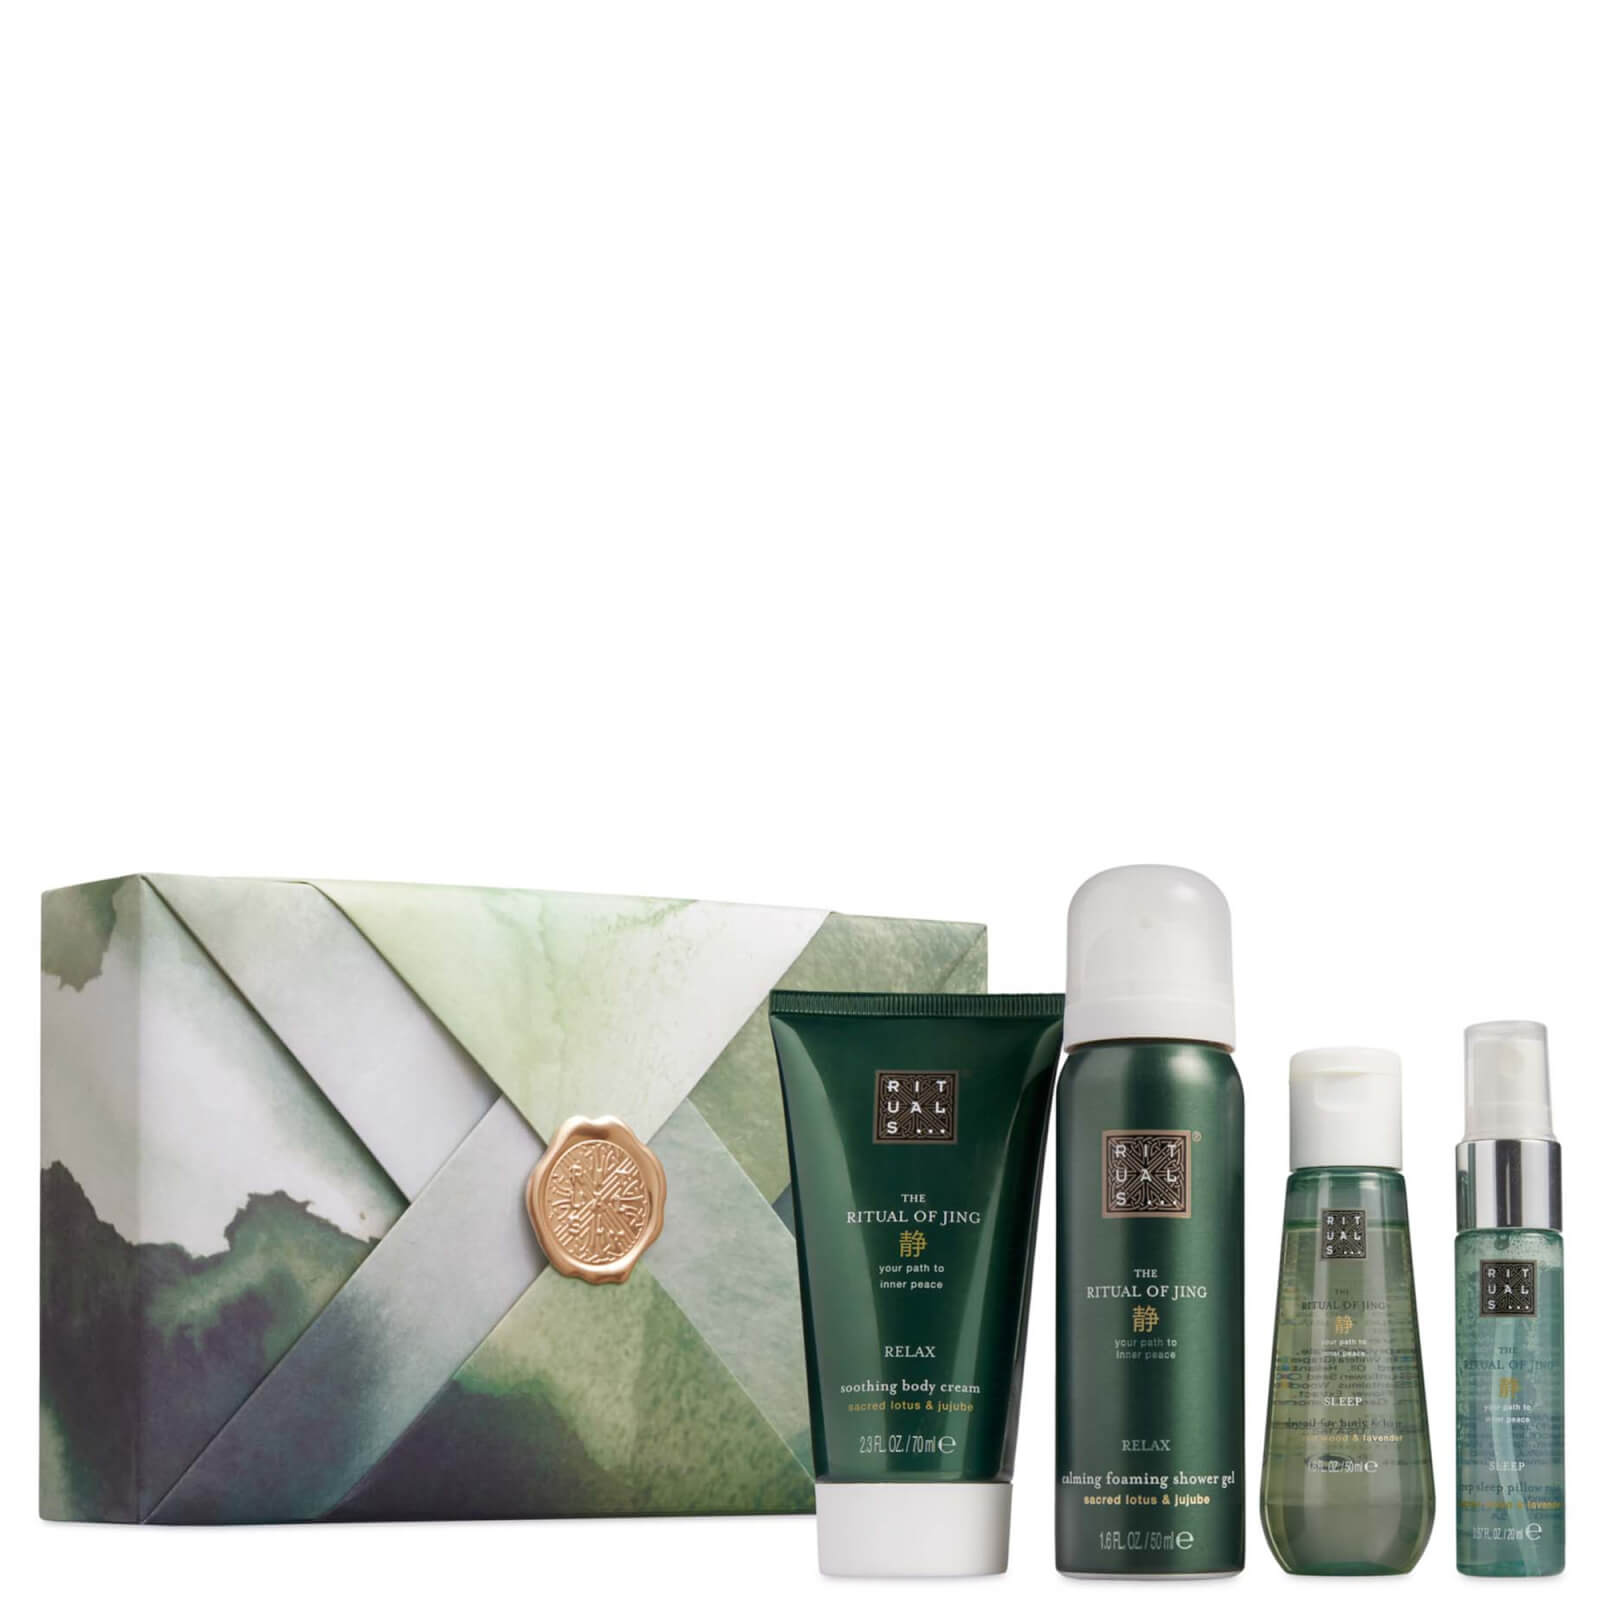 Image of Rituals The Ritual of Jing Subtle Floral Lotus & Jujube Body Small Gift Set